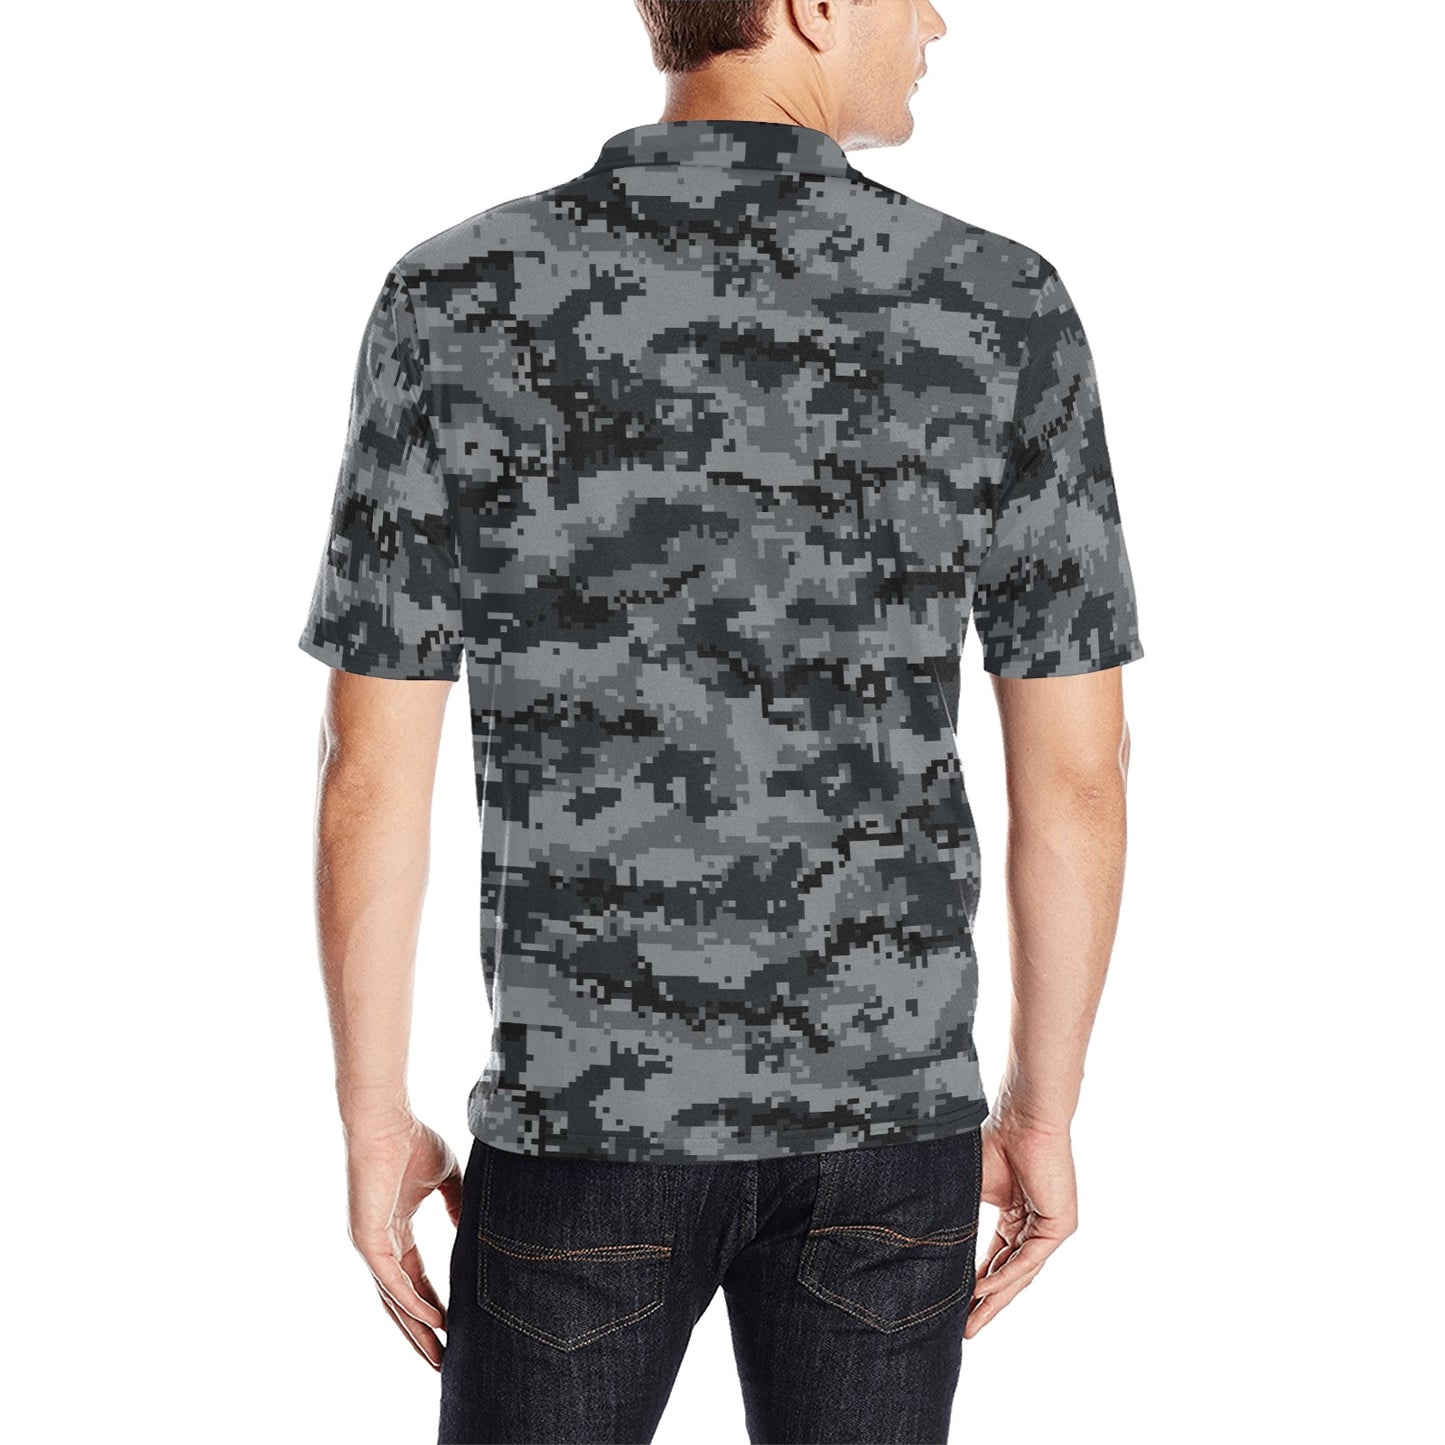 Camouflage Men Polo Collared Shirt, Digital Camo Grey Black Pattern Casual Summer Buttoned Down Up Shirt Short Sleeve Sports Golf Tee Starcove Fashion